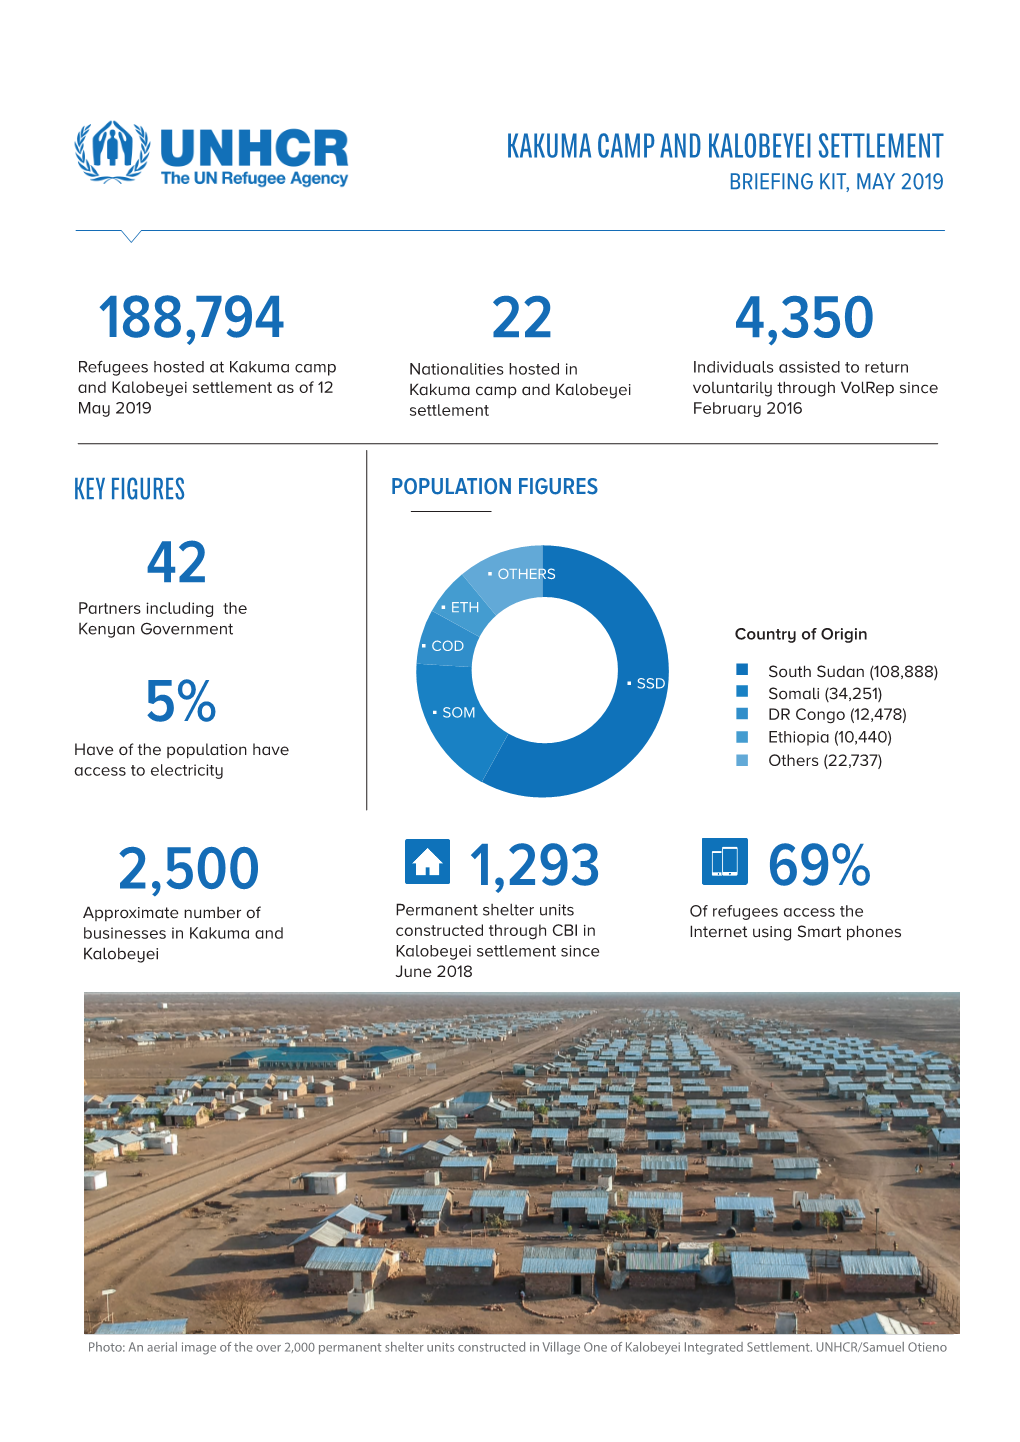 Briefing-Kit May-2019-Approved.Pdf (Unhcr.Org)